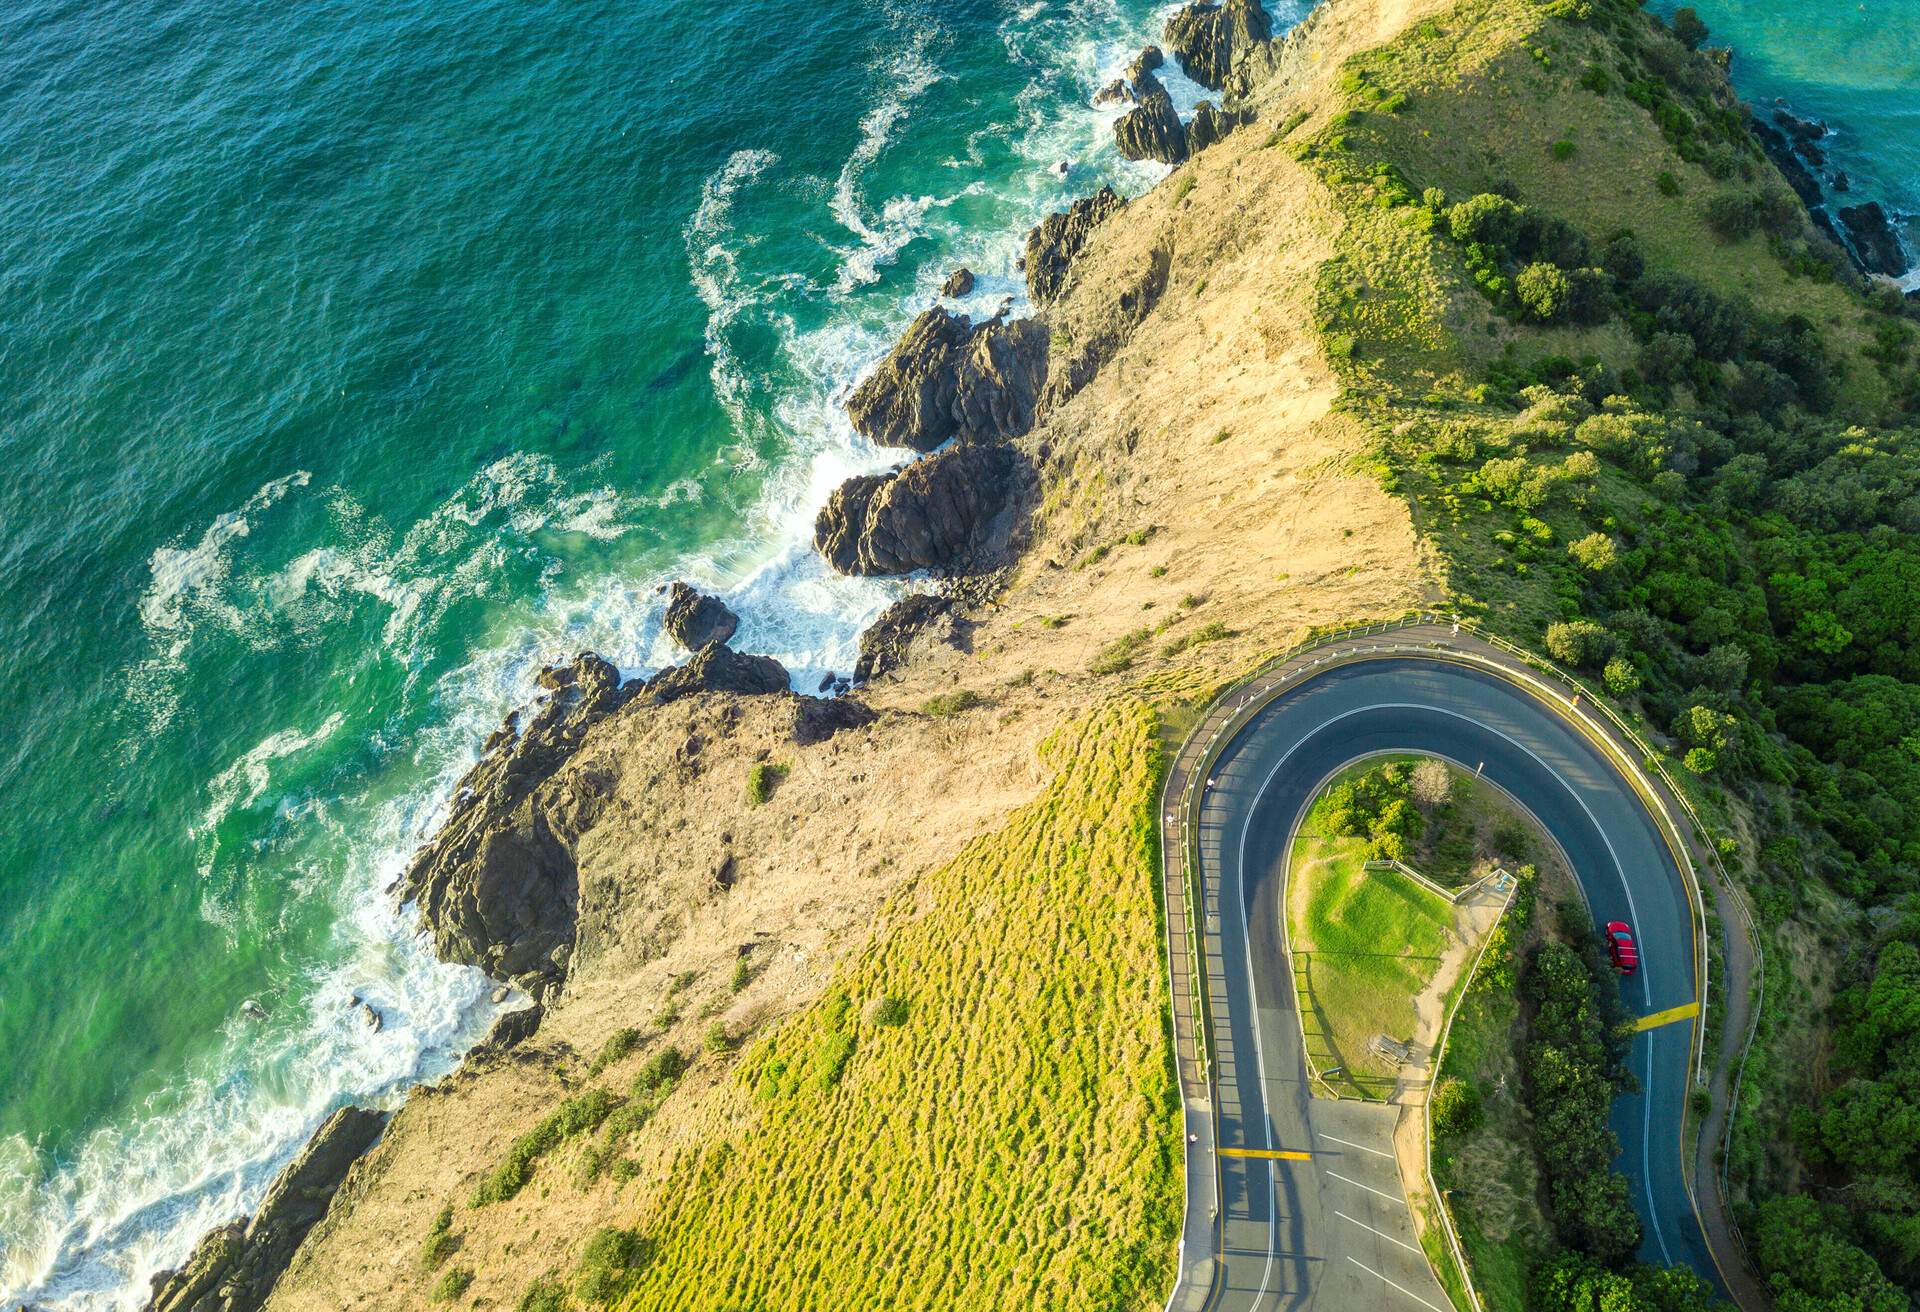 DEST_AUSTRALIA_NEW SOUTH WALES_BYRON BAY_AERIAL_GettyImages-1017071346